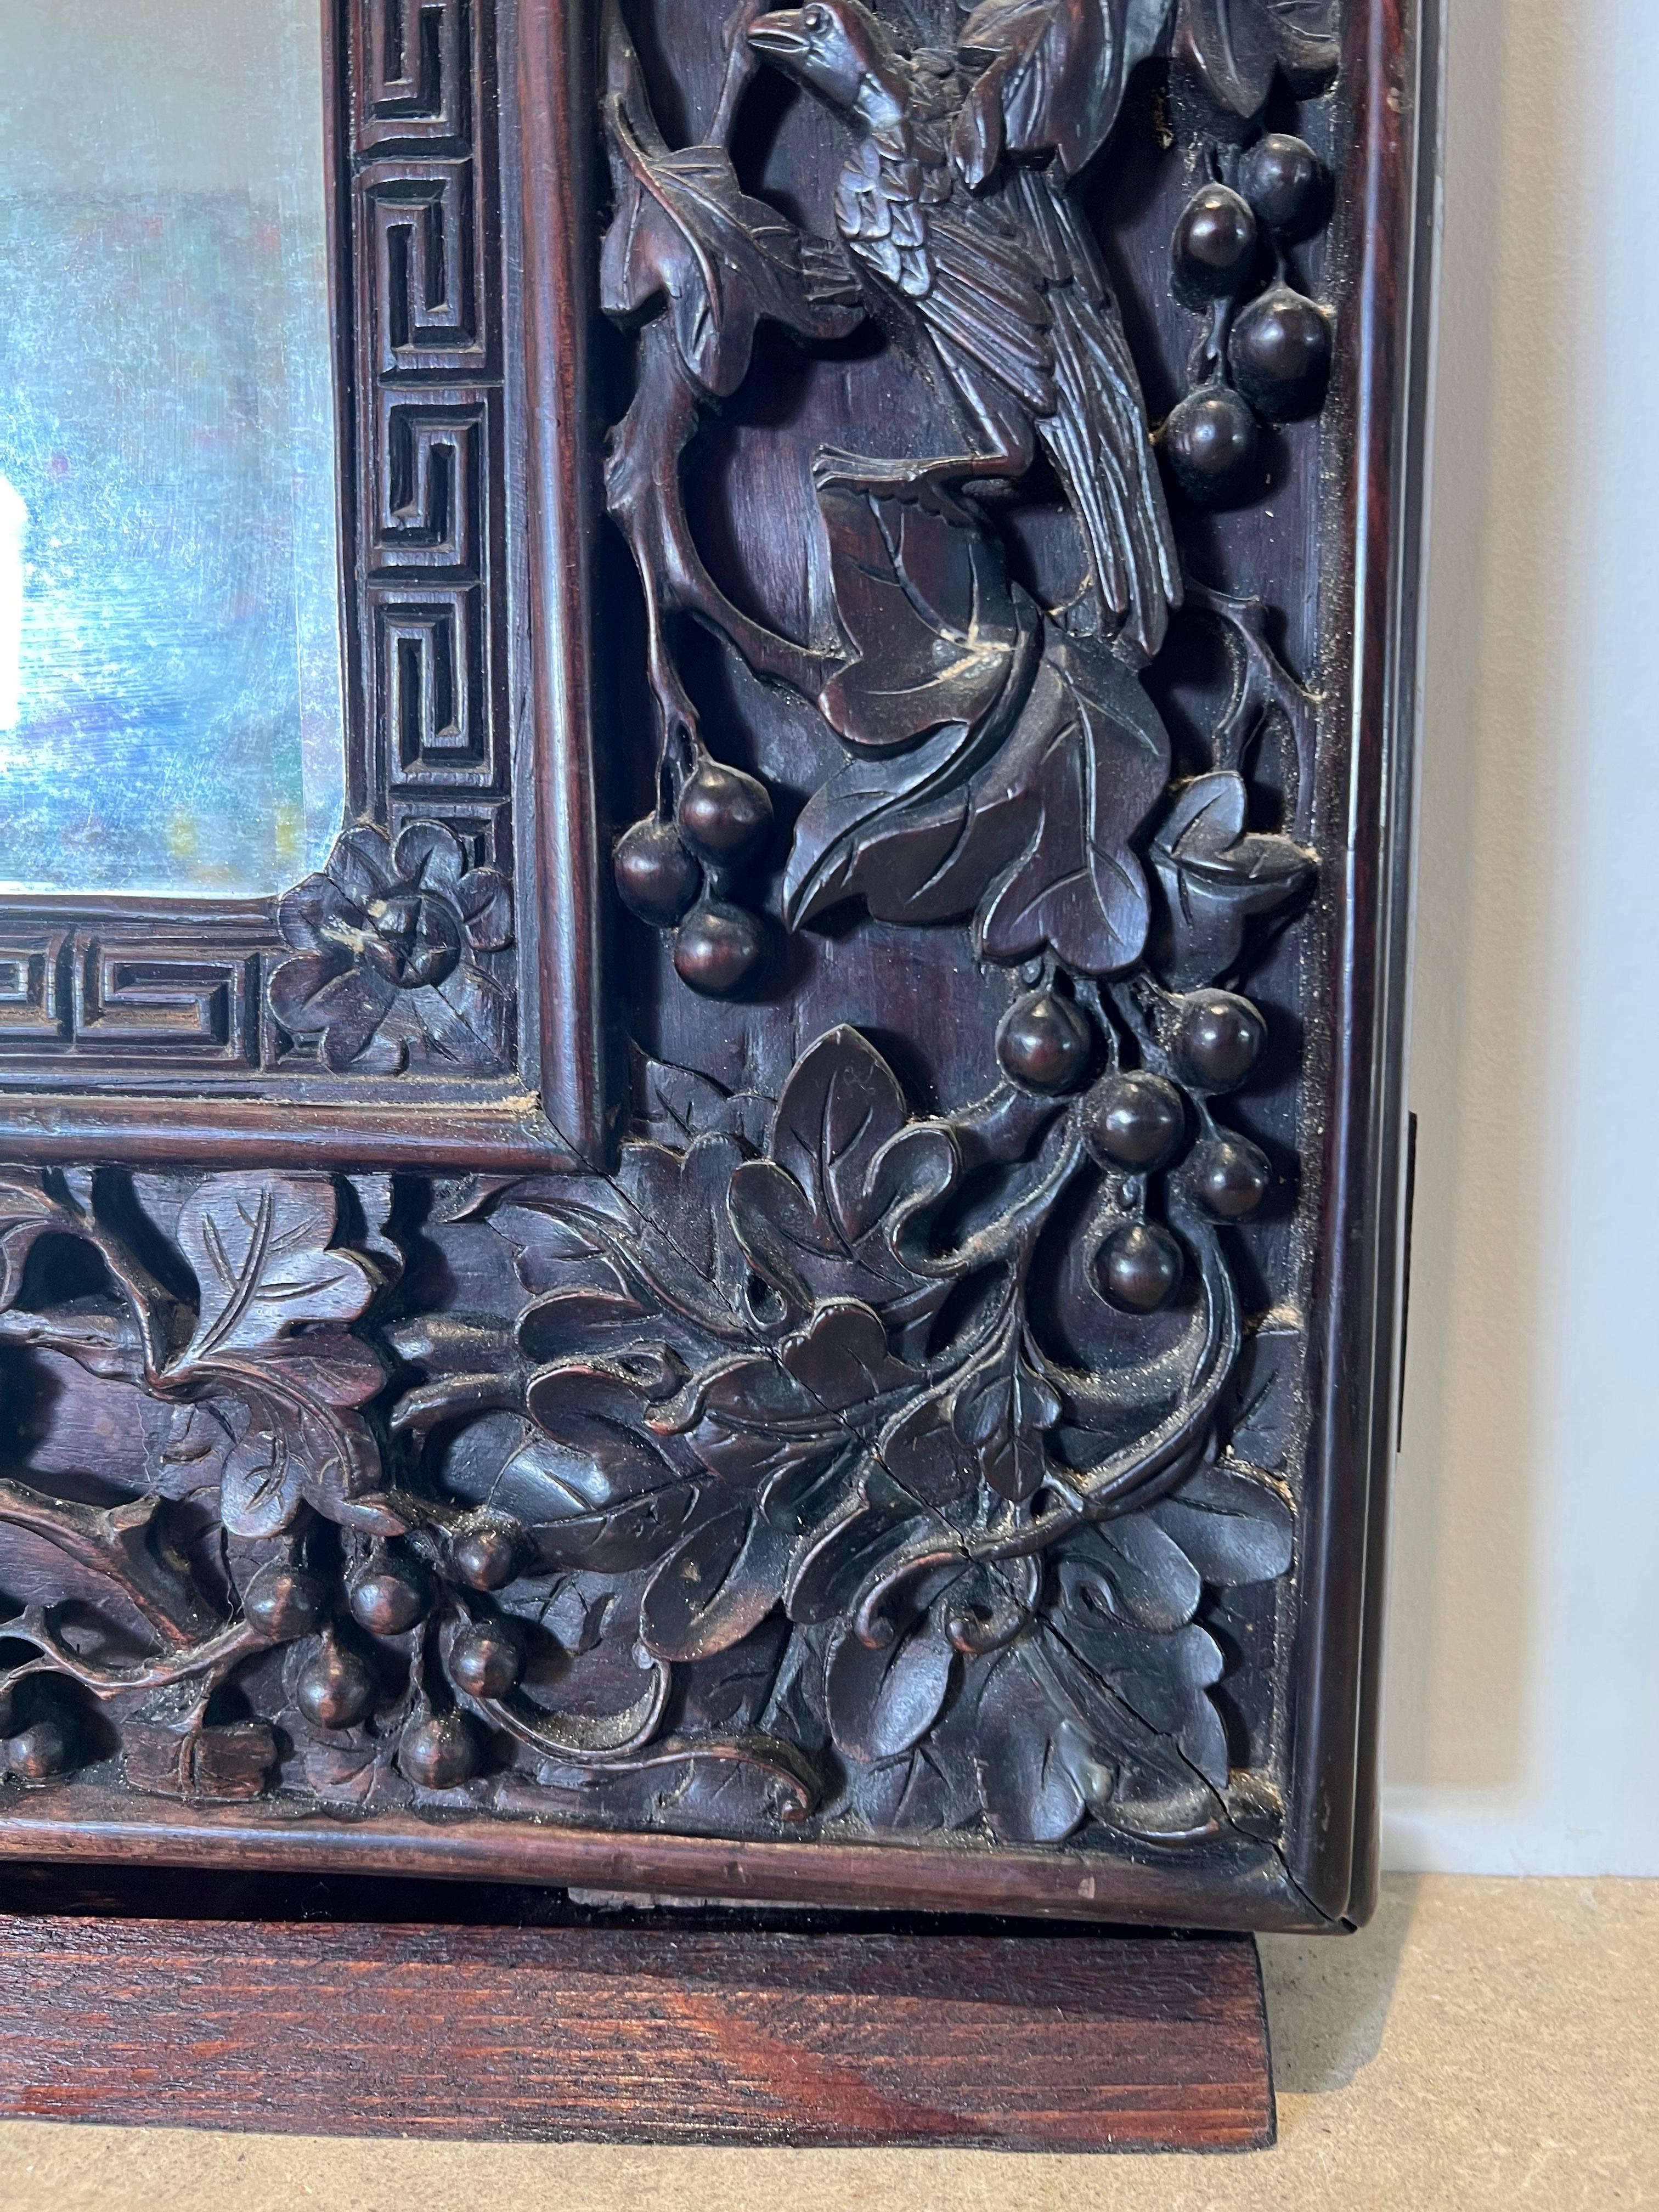 A 19th century deeply carved rosewood mirror in a very large scale from the Canton region of China. This large vertical mirror is fully carved with folliage, animals, birds berries and dragons. It is highly decorative and would be beautiful mixed